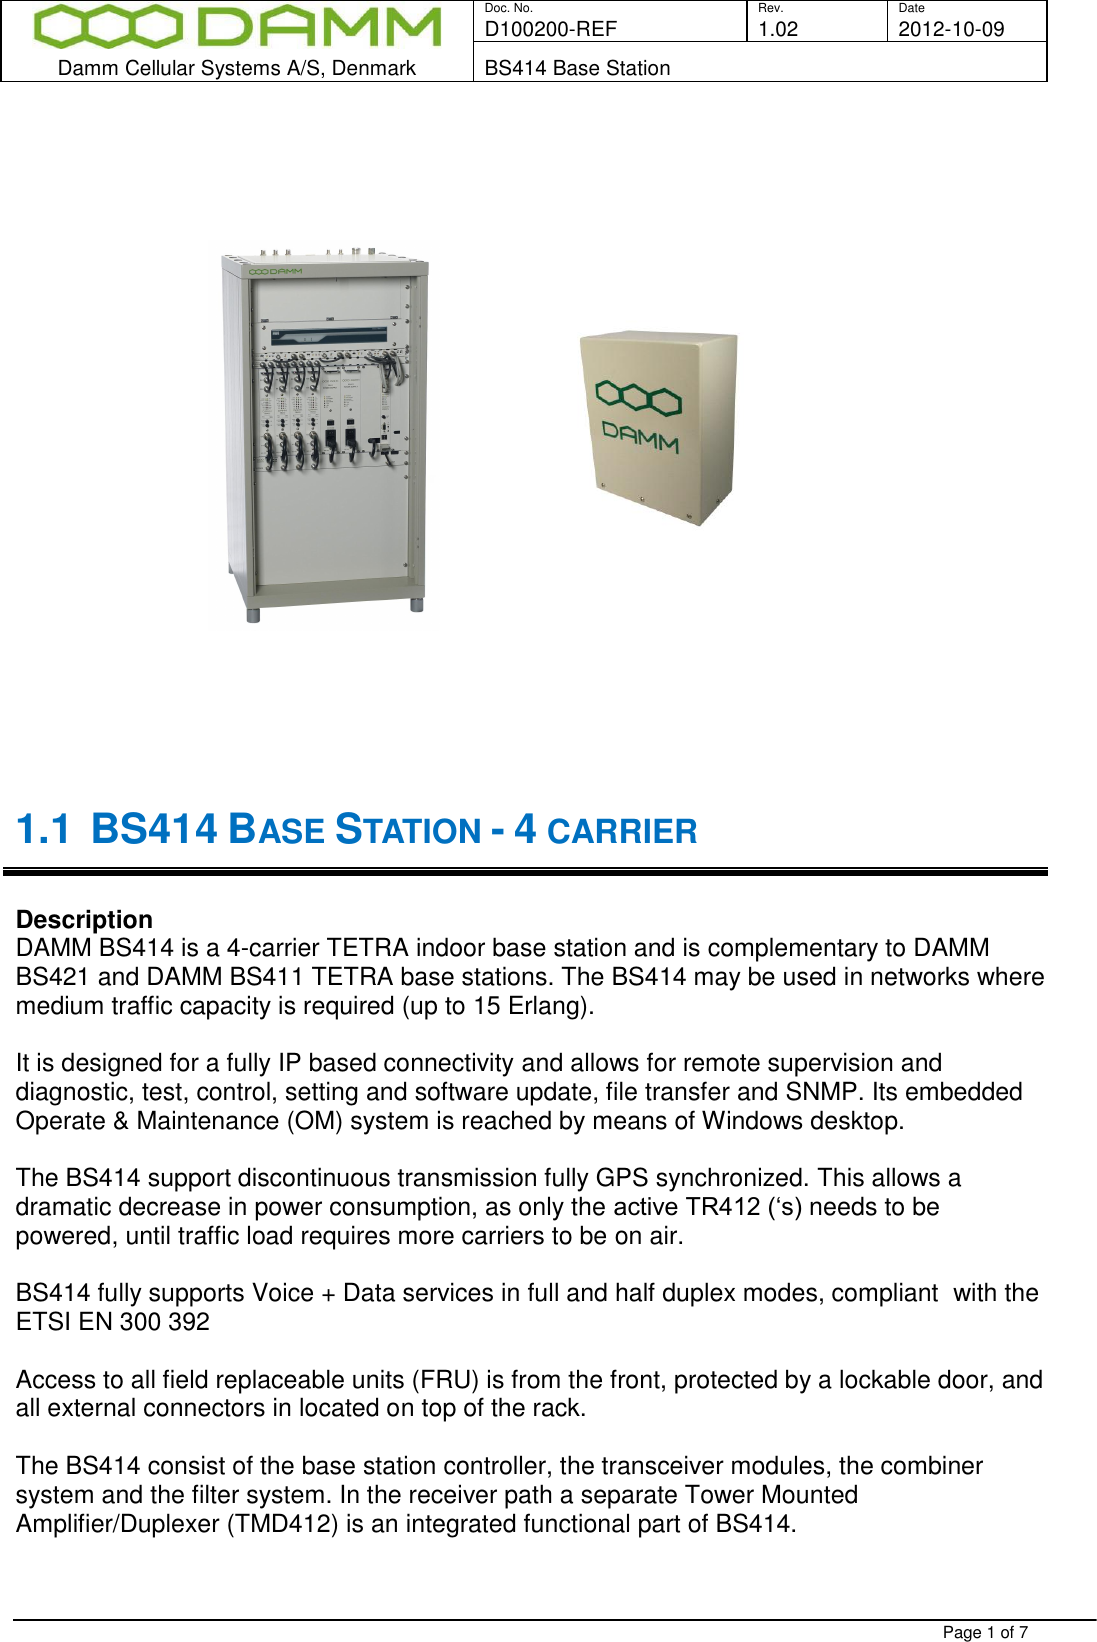  Doc. No. Rev. Date D100200-REF  1.02 2012-10-09  Damm Cellular Systems A/S, Denmark BS414 Base Station   Page 1 of 7                         1.1 BS414 BASE STATION - 4 CARRIER   Description DAMM BS414 is a 4-carrier TETRA indoor base station and is complementary to DAMM BS421 and DAMM BS411 TETRA base stations. The BS414 may be used in networks where medium traffic capacity is required (up to 15 Erlang).   It is designed for a fully IP based connectivity and allows for remote supervision and diagnostic, test, control, setting and software update, file transfer and SNMP. Its embedded Operate &amp; Maintenance (OM) system is reached by means of Windows desktop.  The BS414 support discontinuous transmission fully GPS synchronized. This allows a dramatic decrease in power consumption, as only the active TR412 (‘s) needs to be powered, until traffic load requires more carriers to be on air.   BS414 fully supports Voice + Data services in full and half duplex modes, compliant  with the ETSI EN 300 392   Access to all field replaceable units (FRU) is from the front, protected by a lockable door, and all external connectors in located on top of the rack.  The BS414 consist of the base station controller, the transceiver modules, the combiner system and the filter system. In the receiver path a separate Tower Mounted Amplifier/Duplexer (TMD412) is an integrated functional part of BS414.   